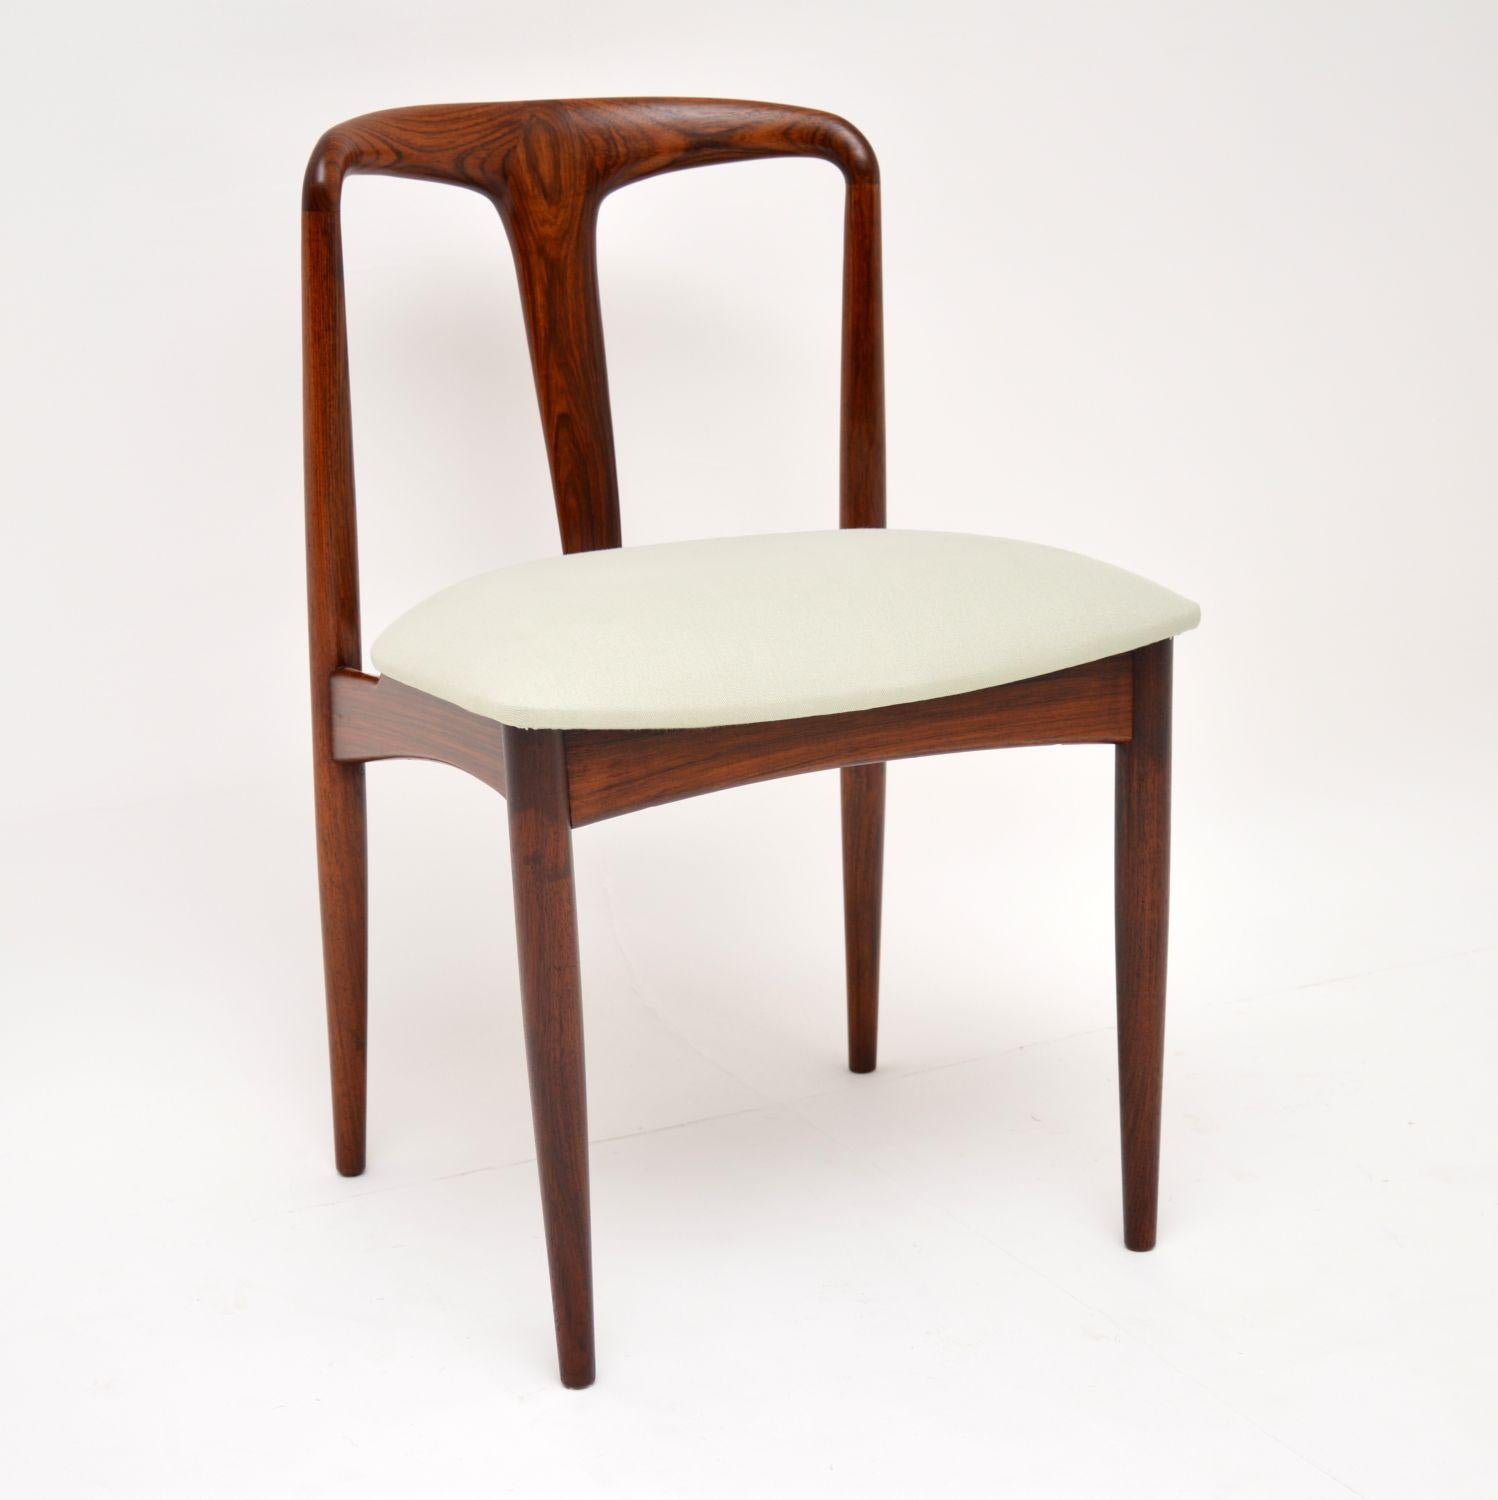 A stunning set of top quality vintage Danish dining chairs in rosewood. This model is called the Julianne chair, they were designed by Johannes Andersen and made by Uldum Møbelfabrik. They date from the 1960s, they are all in superb fully restored